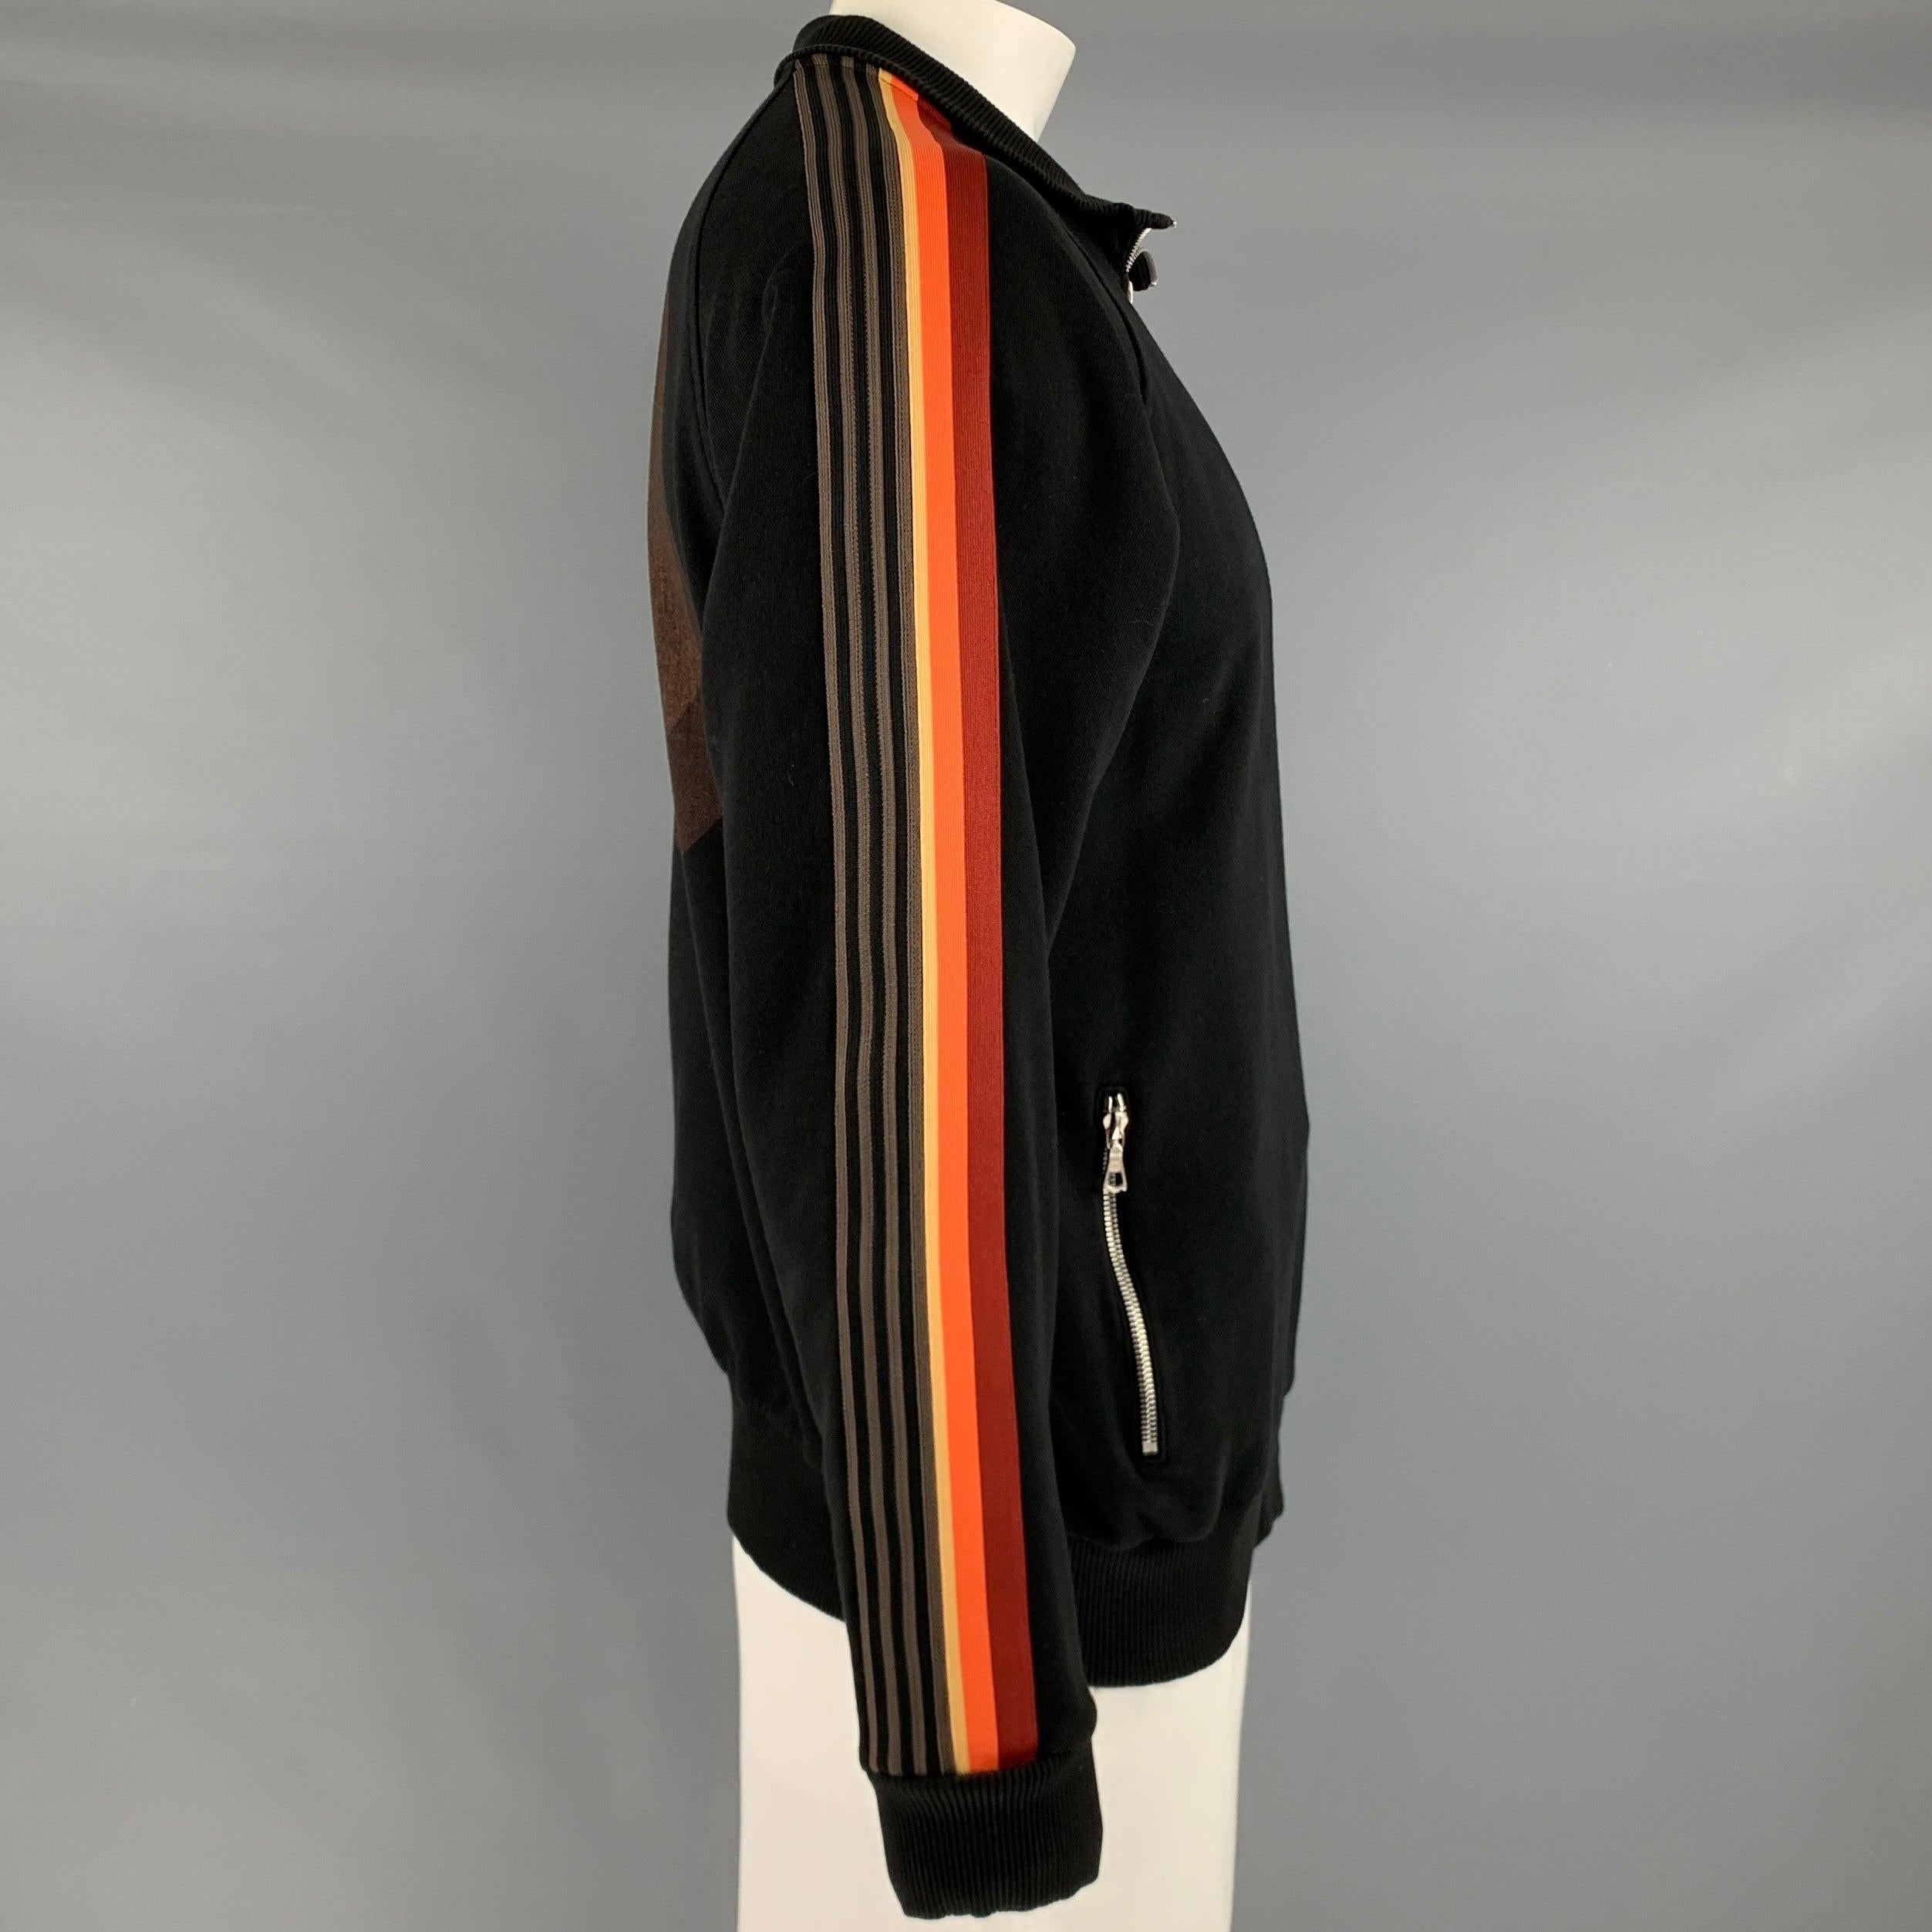 DRIES VAN NOTEN x VERNER PANTON jacket
in a black cotton fabric featuring multi-color stripe details on the shoulder and sleeves, yellow sphere print on the back, and zip up closure. Excellent Pre-Owned Condition. 

Marked:   XL 

Measurements: 
